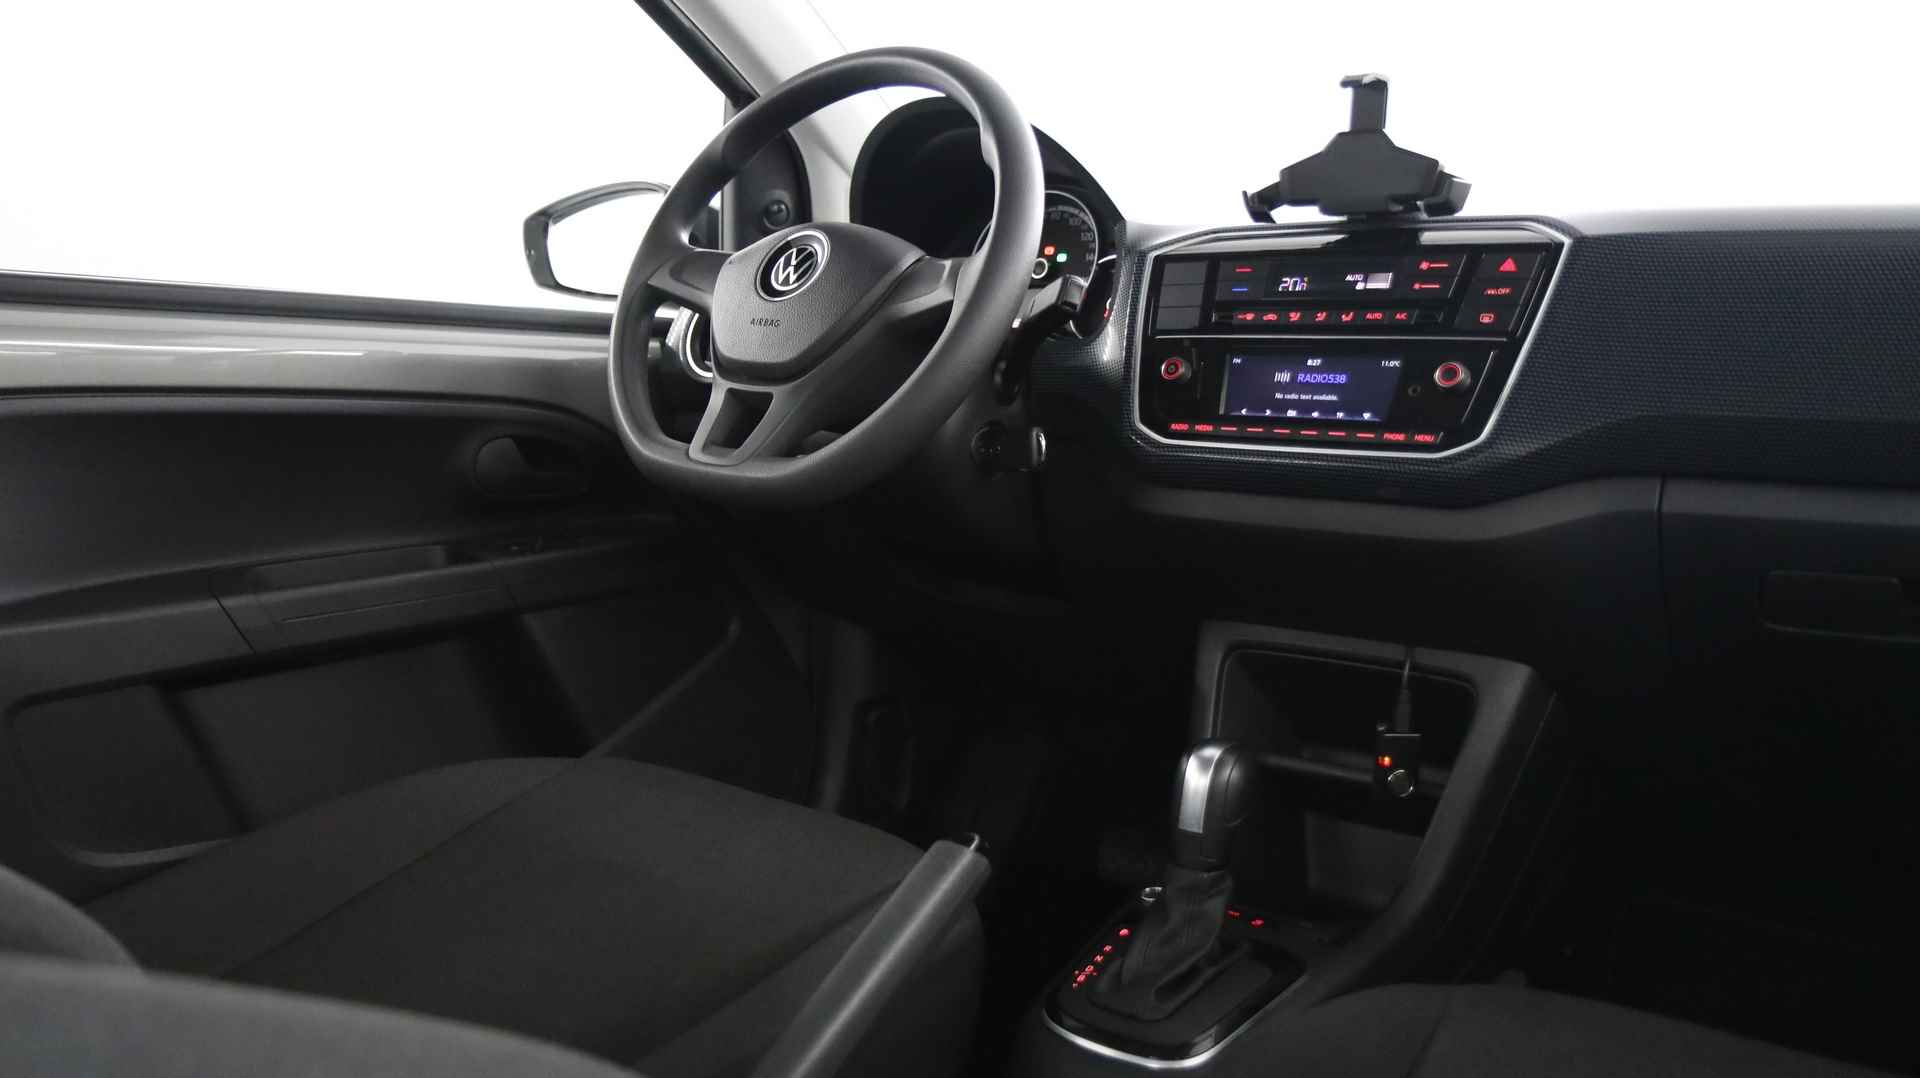 Volkswagen e-Up! e-up! / Airco / Climate control / Wordt verwacht - 16/28